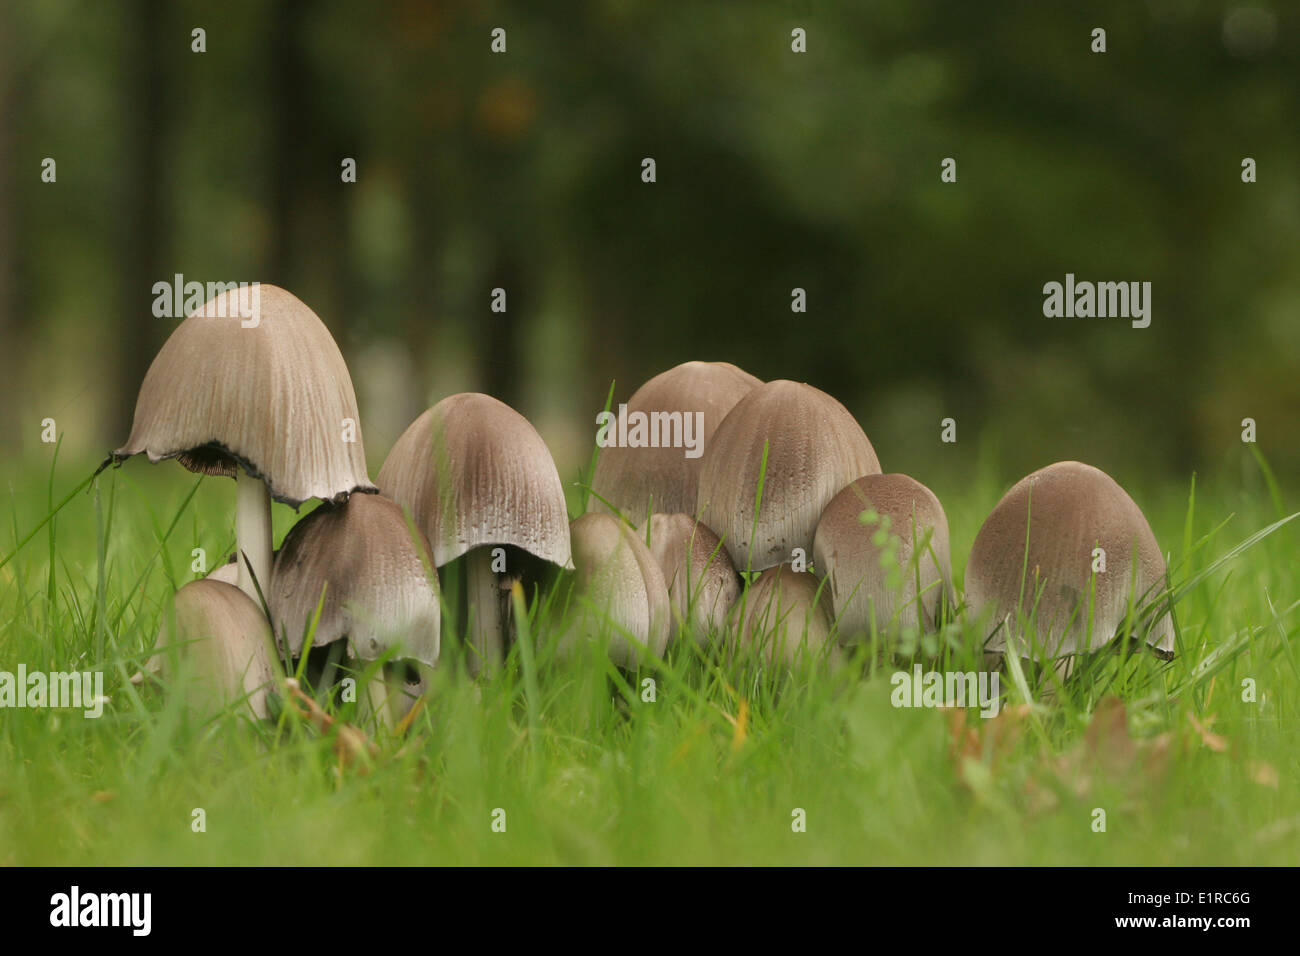 Group of Glistening inkcaps on a grassfield Stock Photo